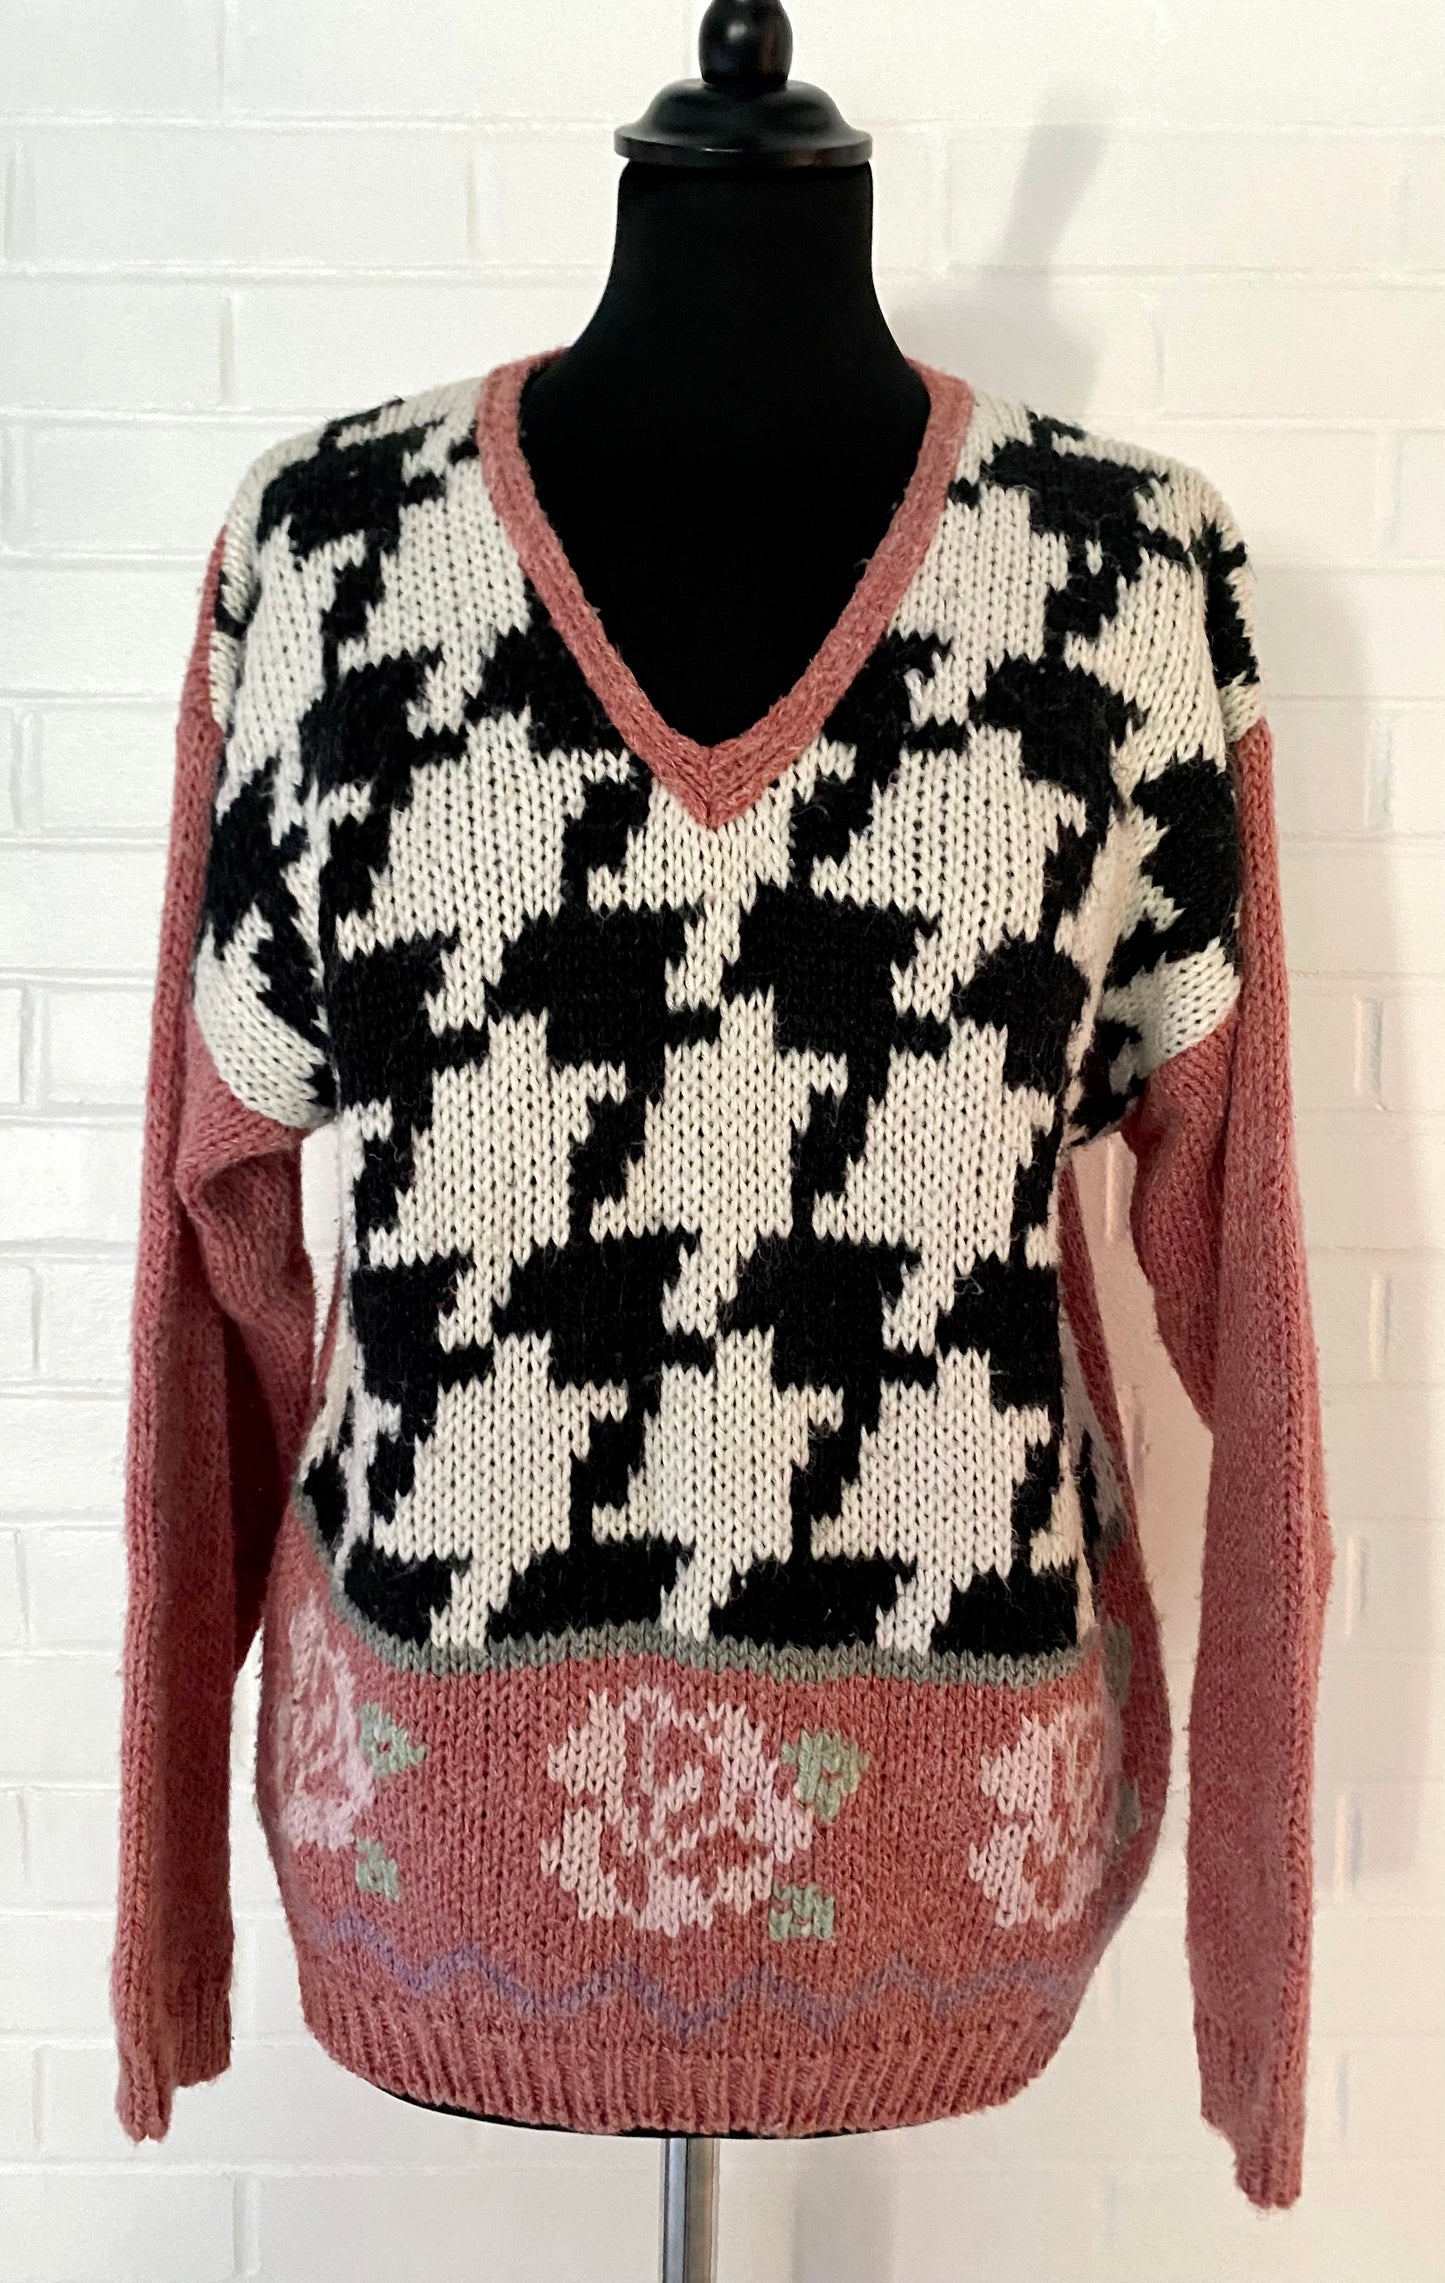 1980s Why Oaks, Hand Knitted Sweater